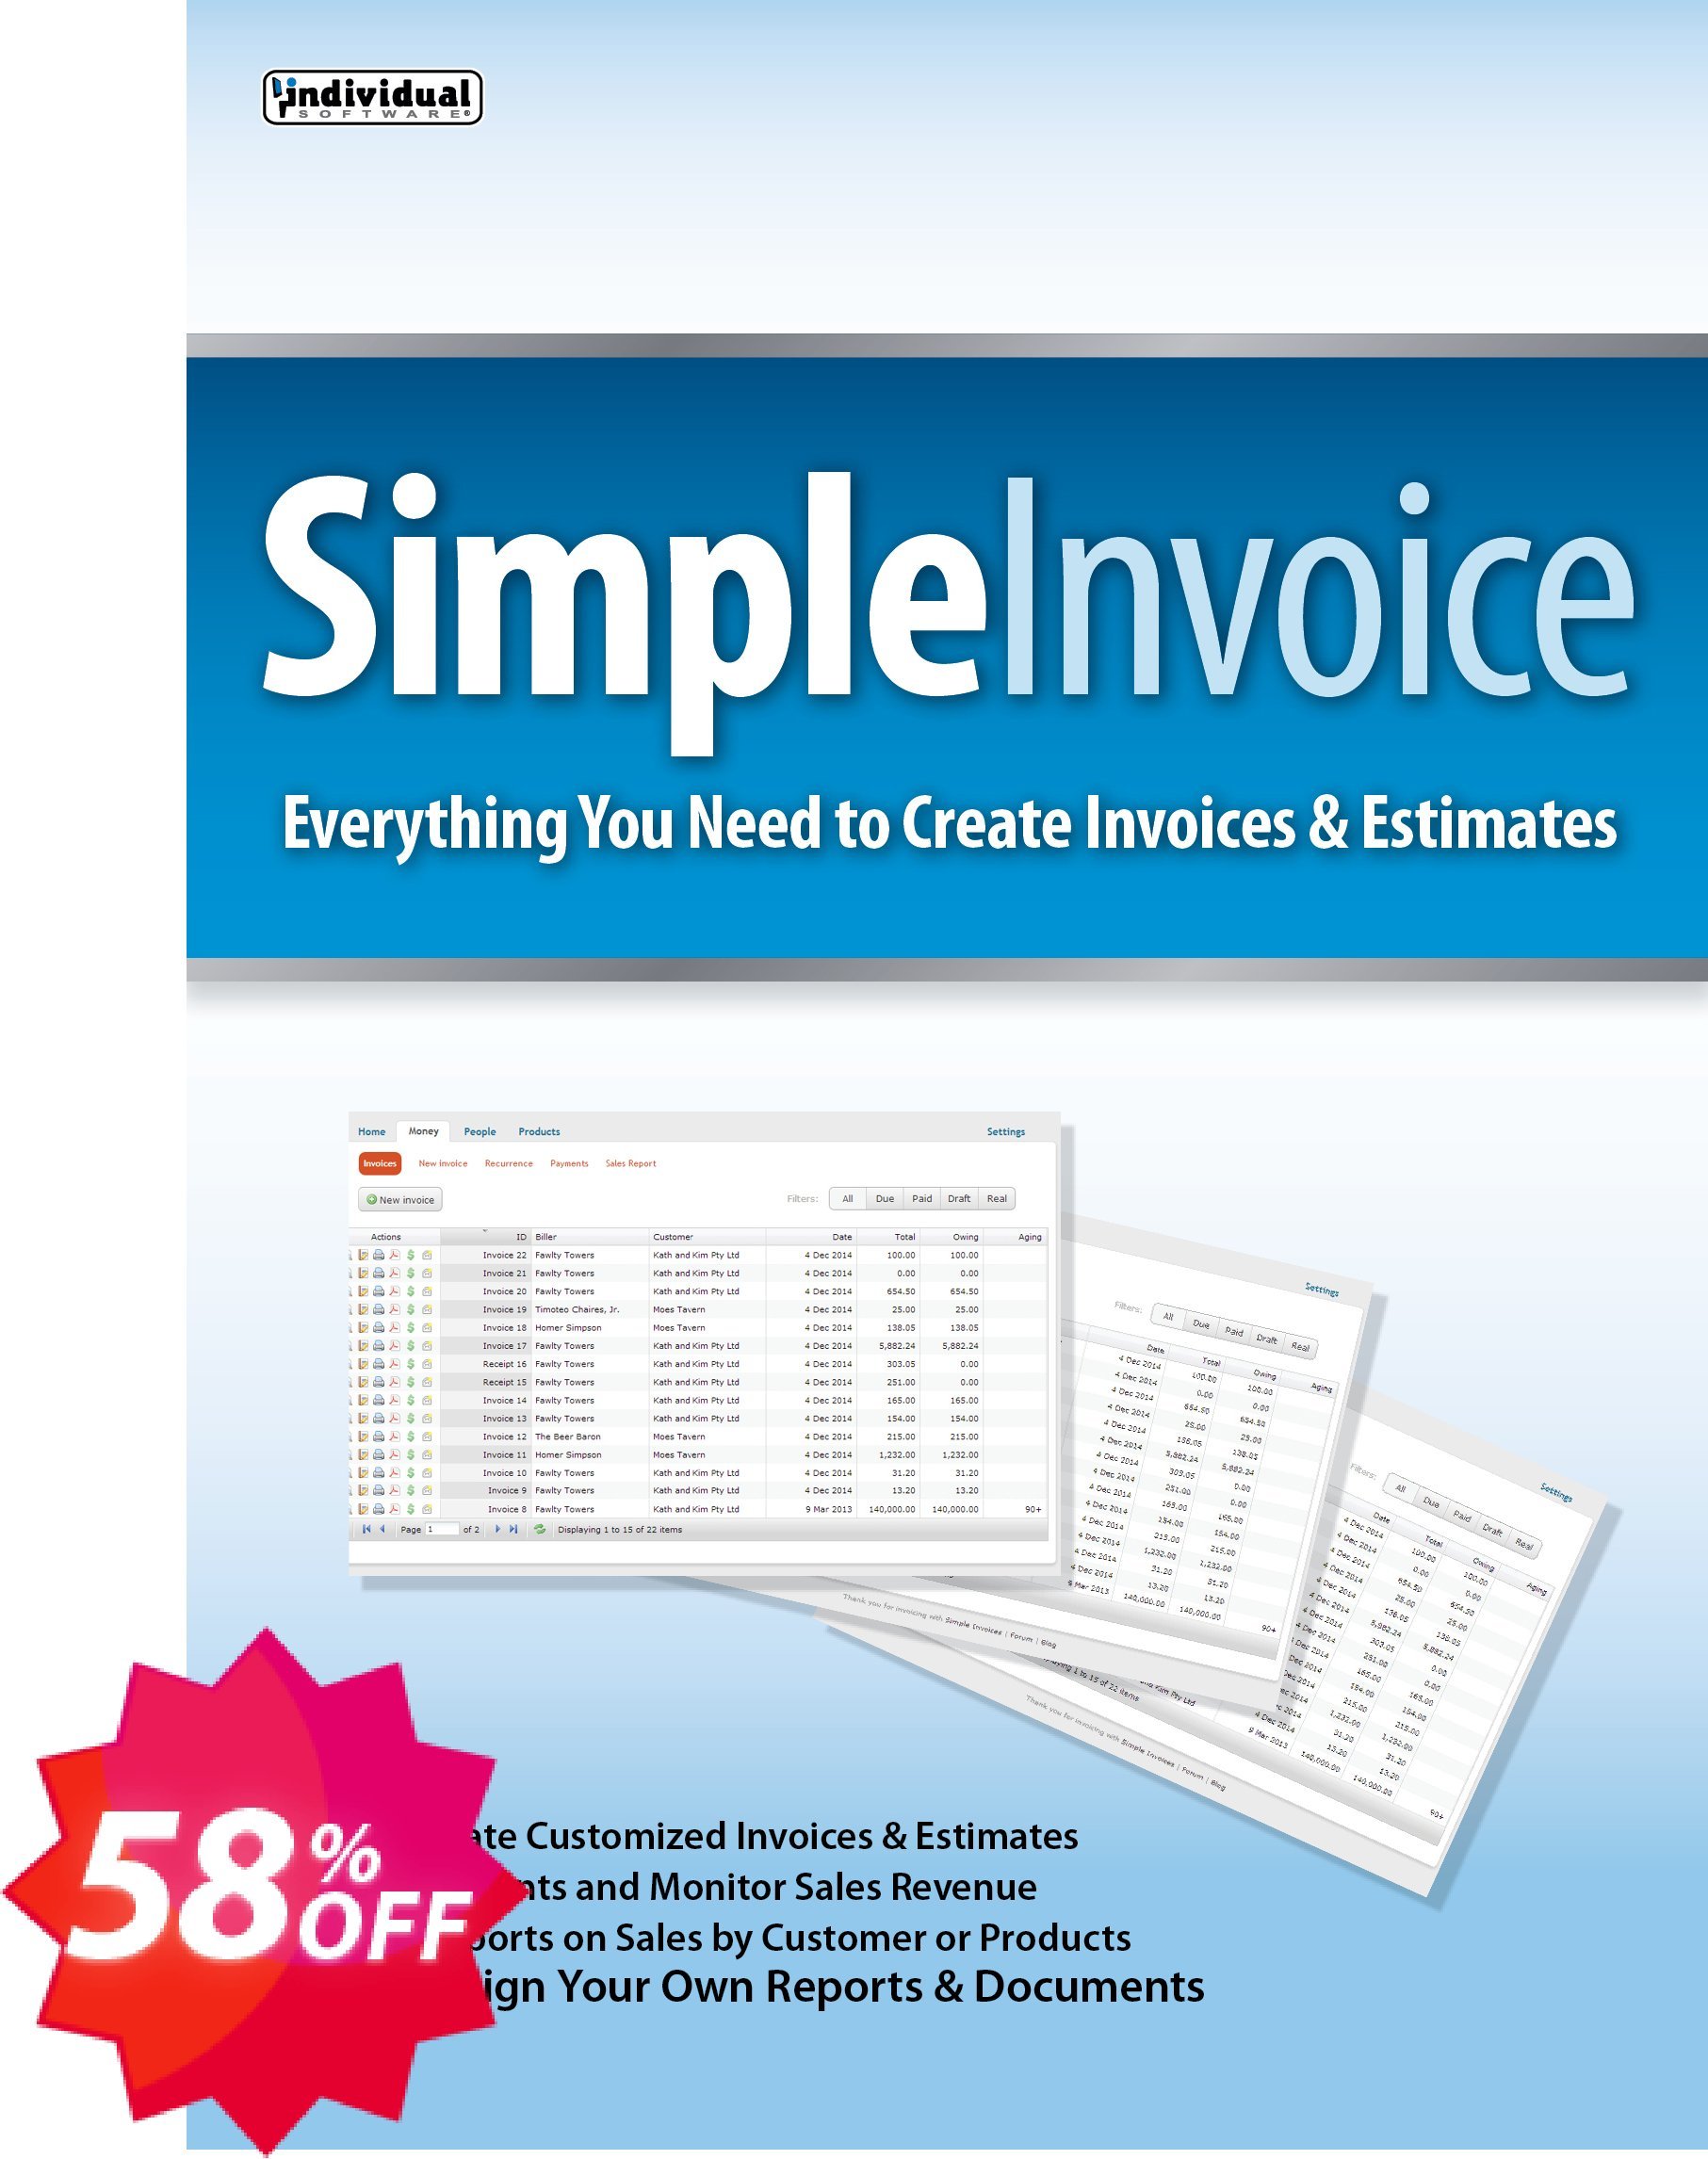 SimpleInvoice Coupon code 58% discount 